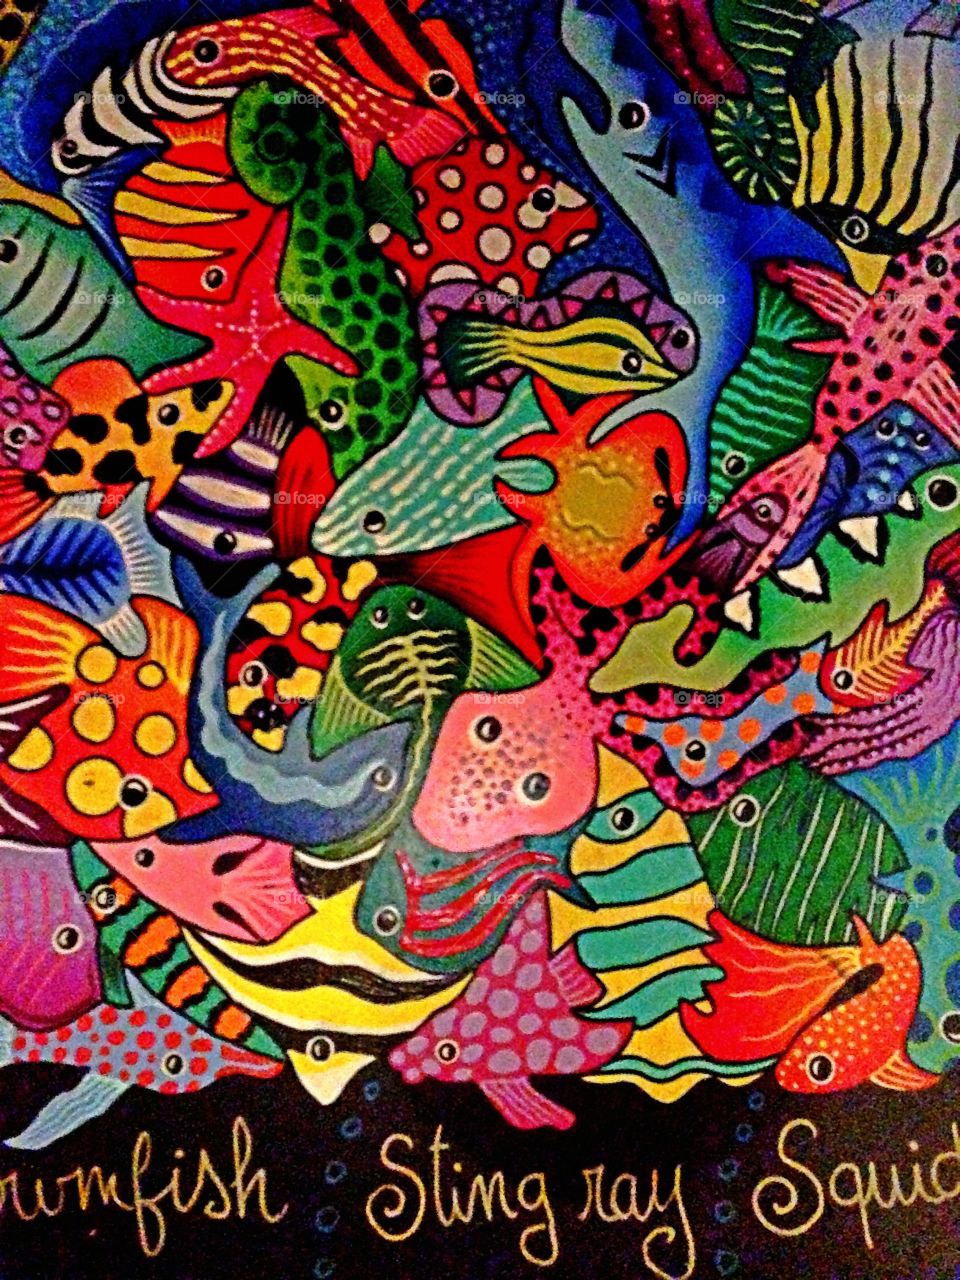 Psychedelic fish
